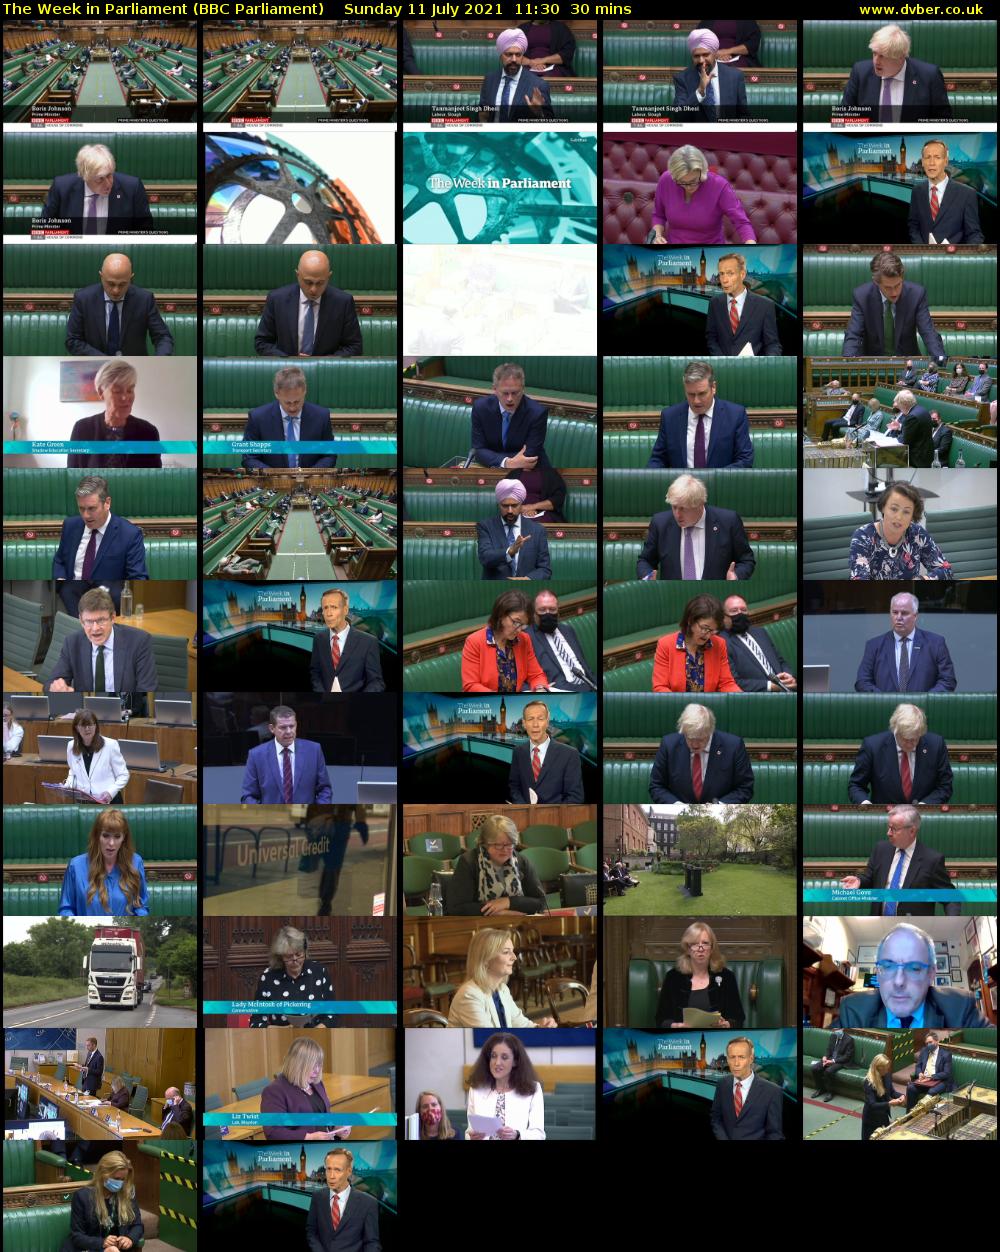 The Week in Parliament (BBC Parliament) Sunday 11 July 2021 11:30 - 12:00